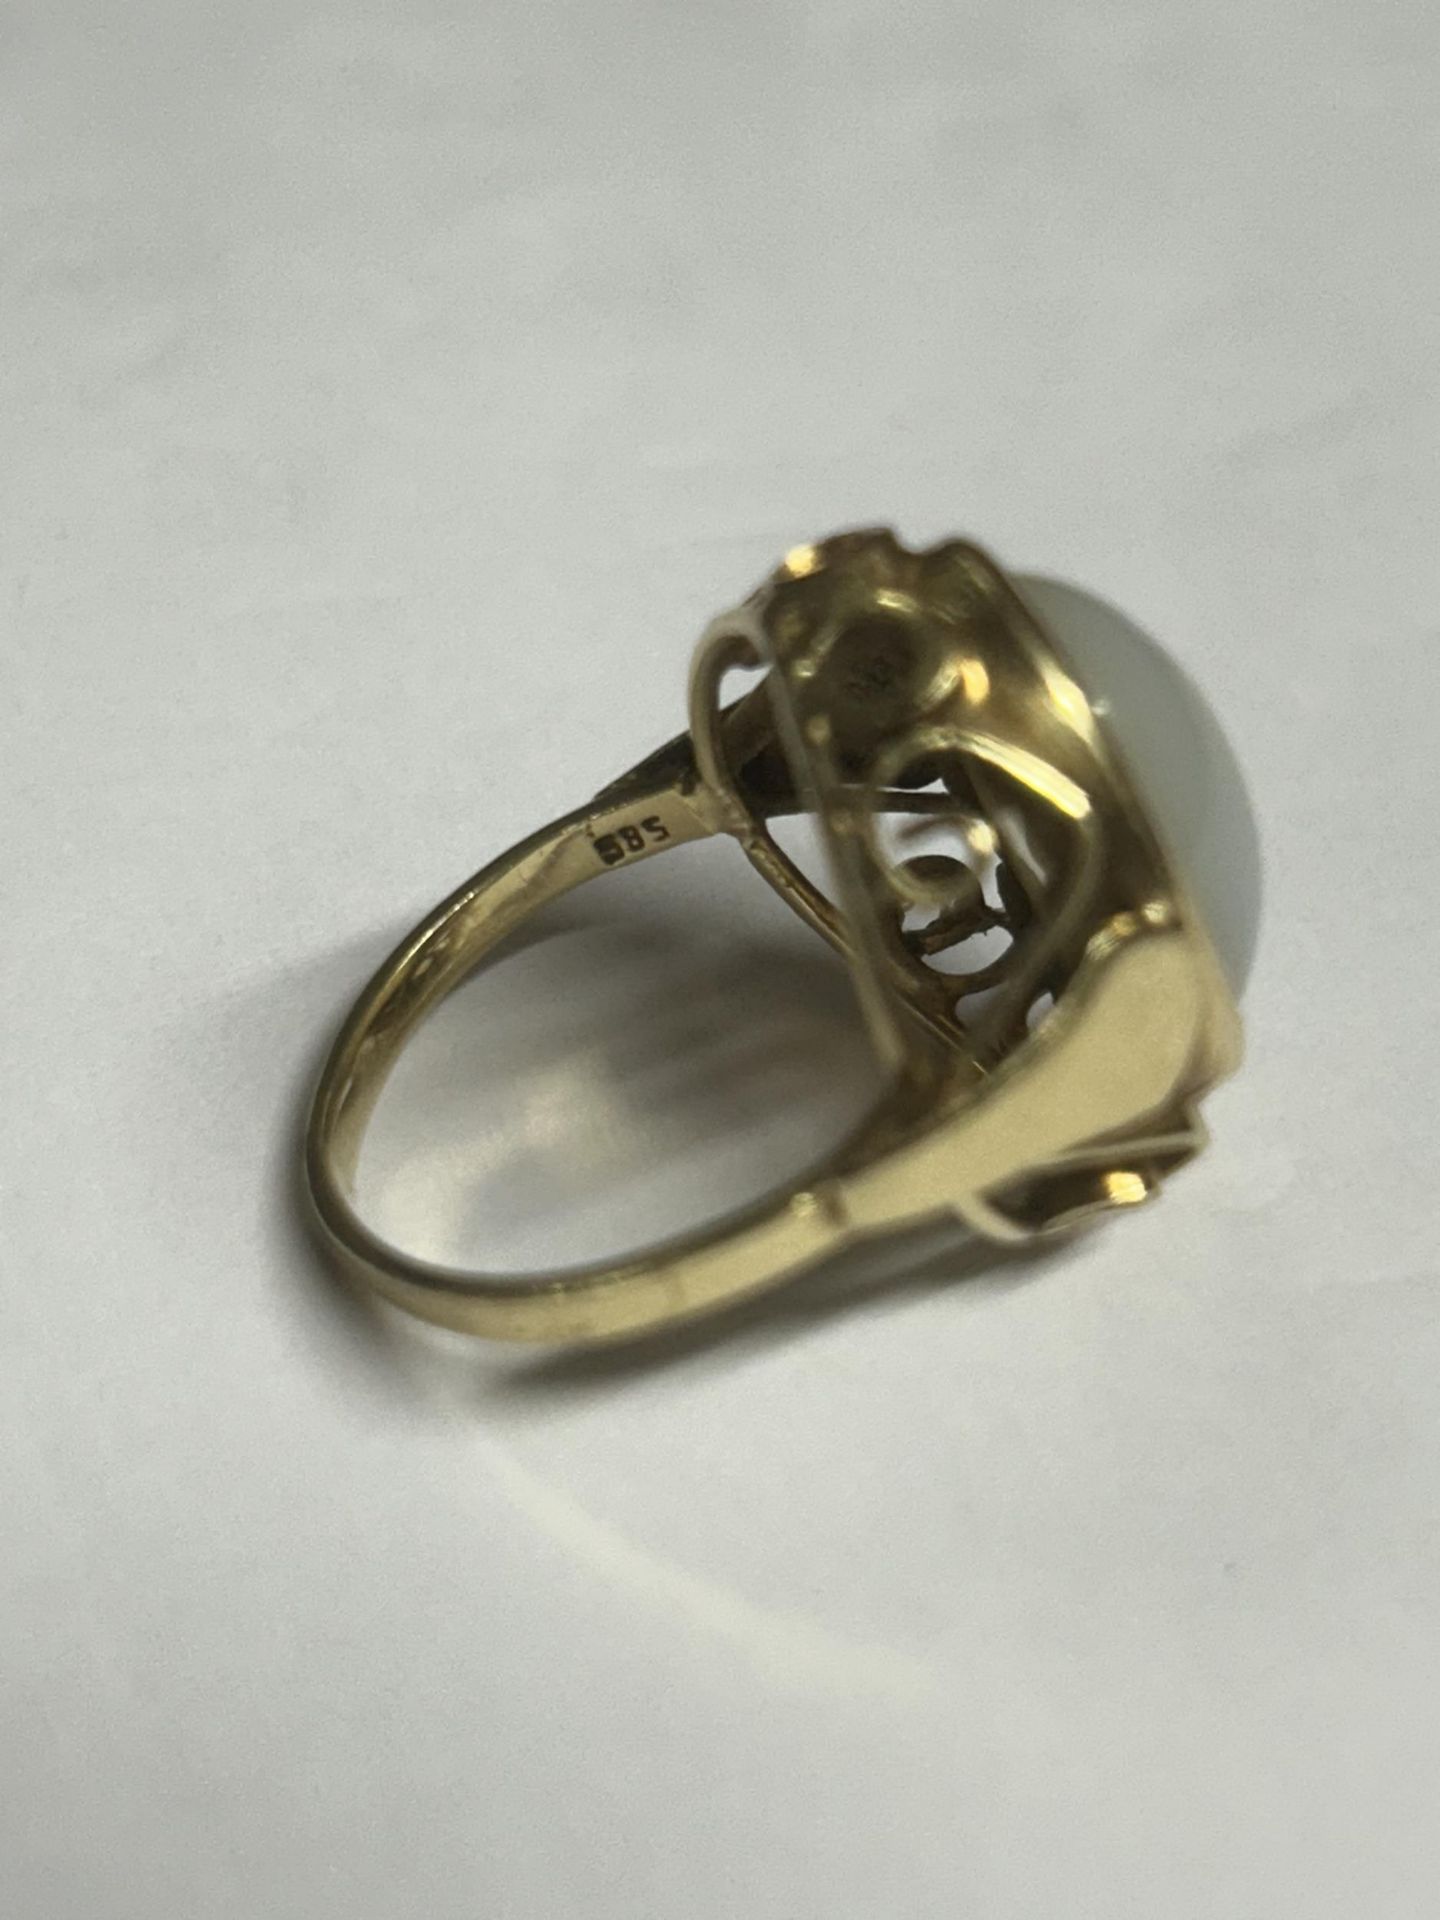 A 14CT GOLD DRESS RING, SIZE L. WEIGHT 5.09 GRAMS - Image 2 of 4